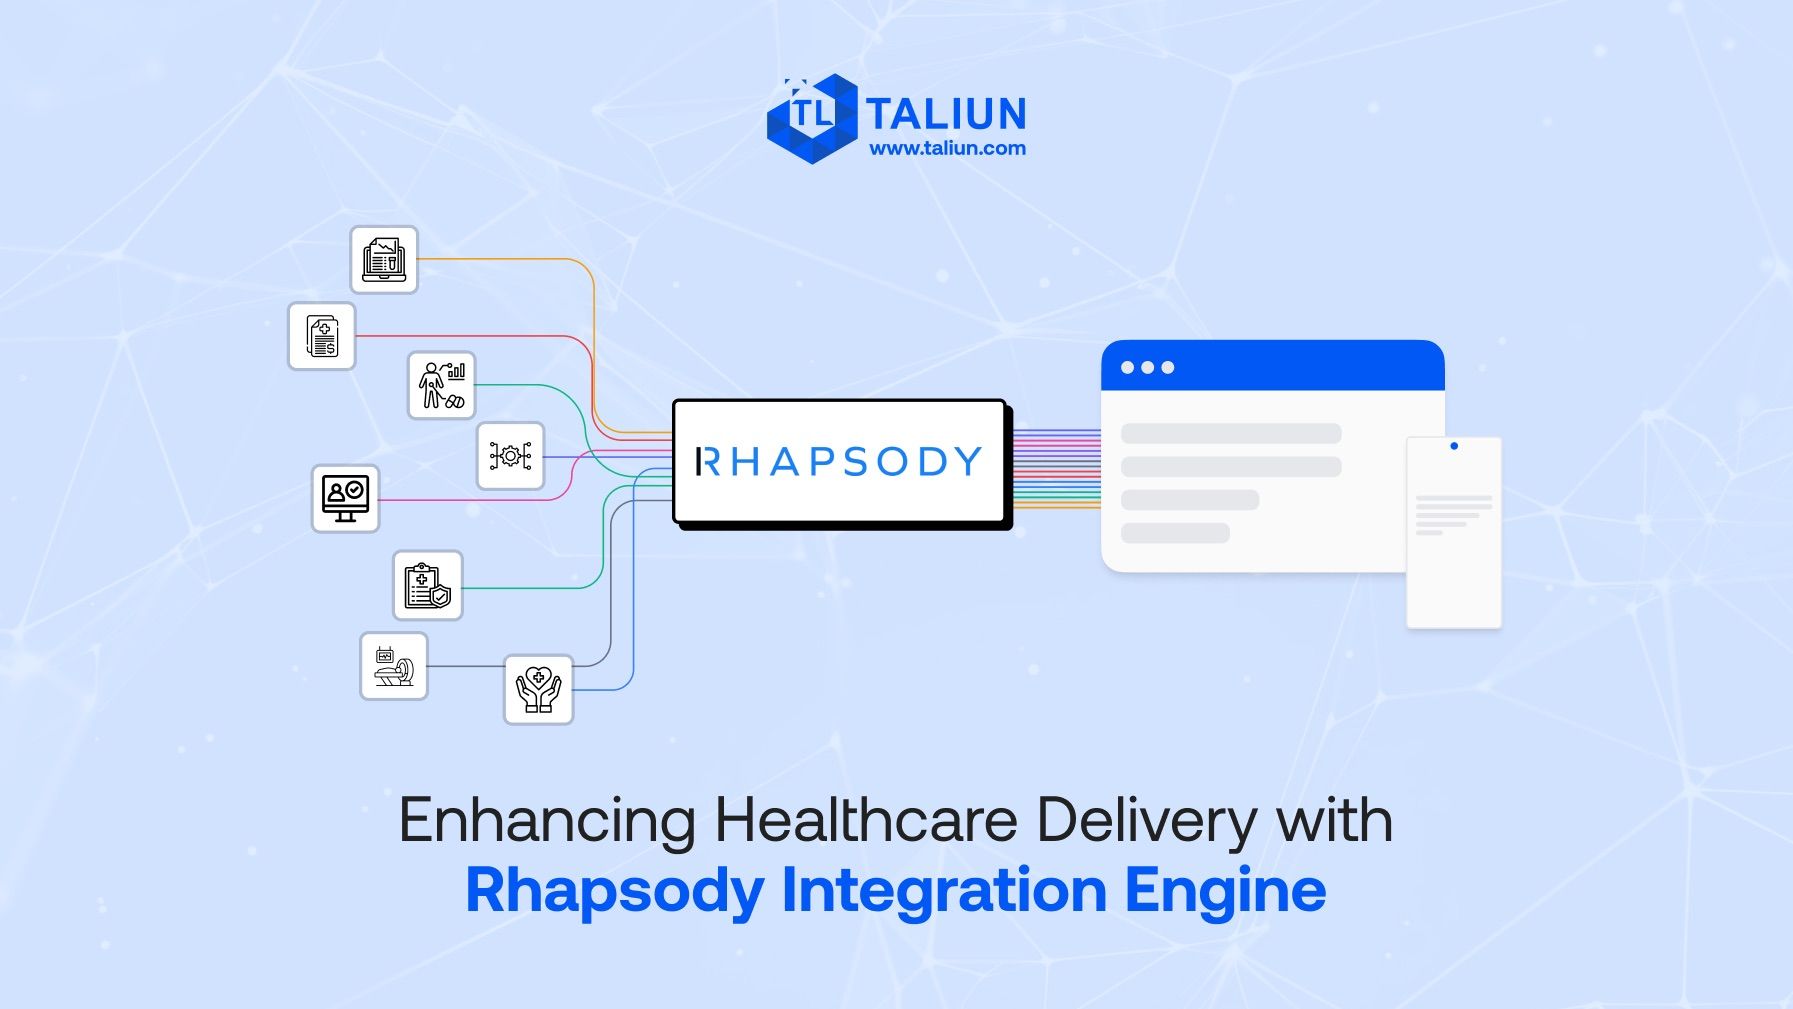 Enhancing Healthcare Delivery with Rhapsody Integration Engine - Taliun